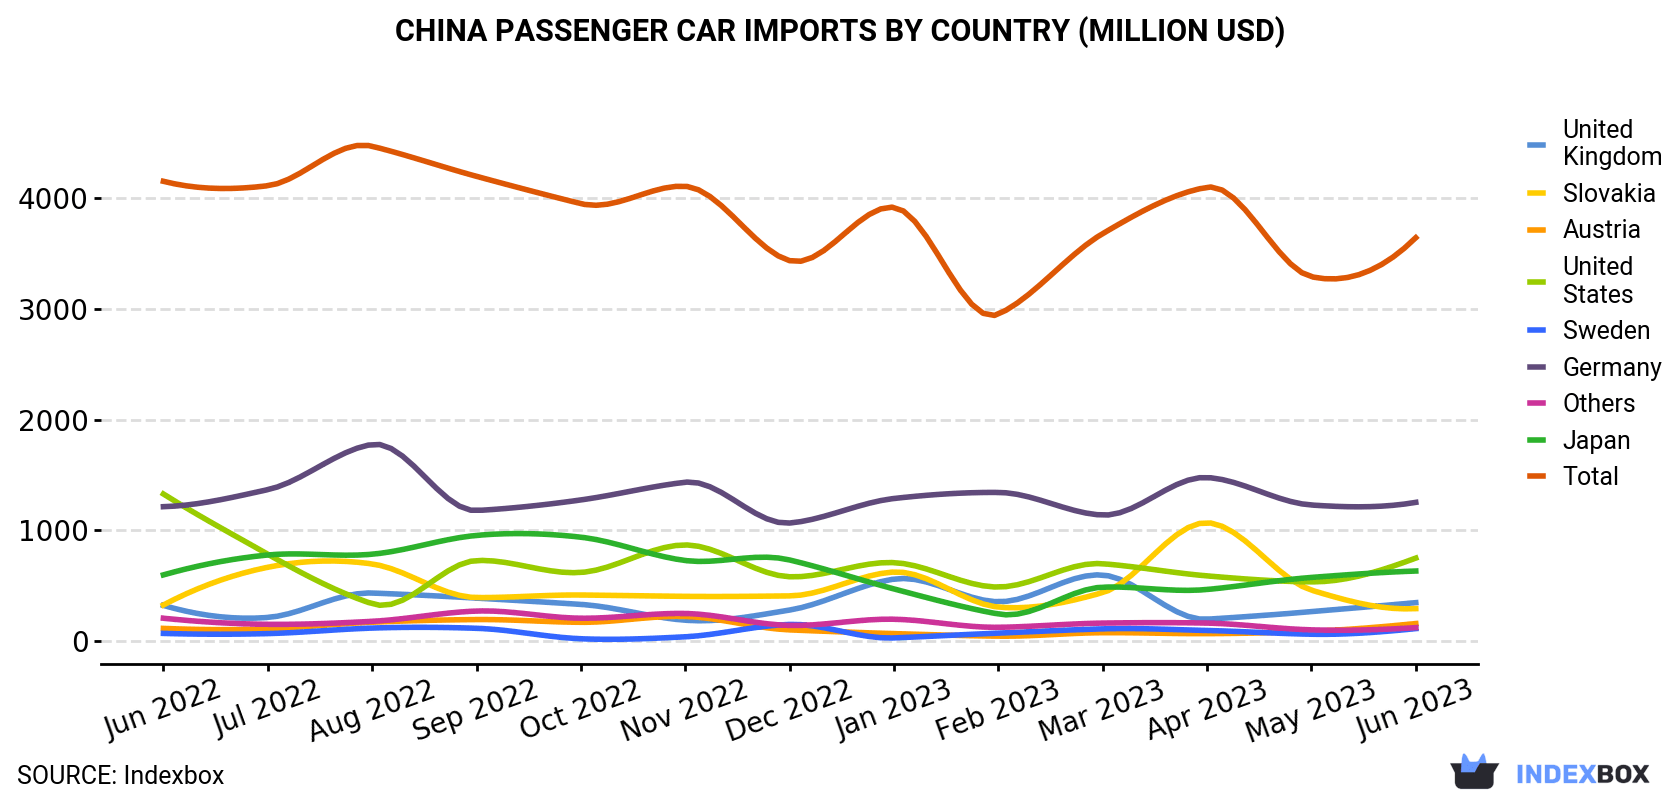 China Passenger Car Imports By Country (Million USD)